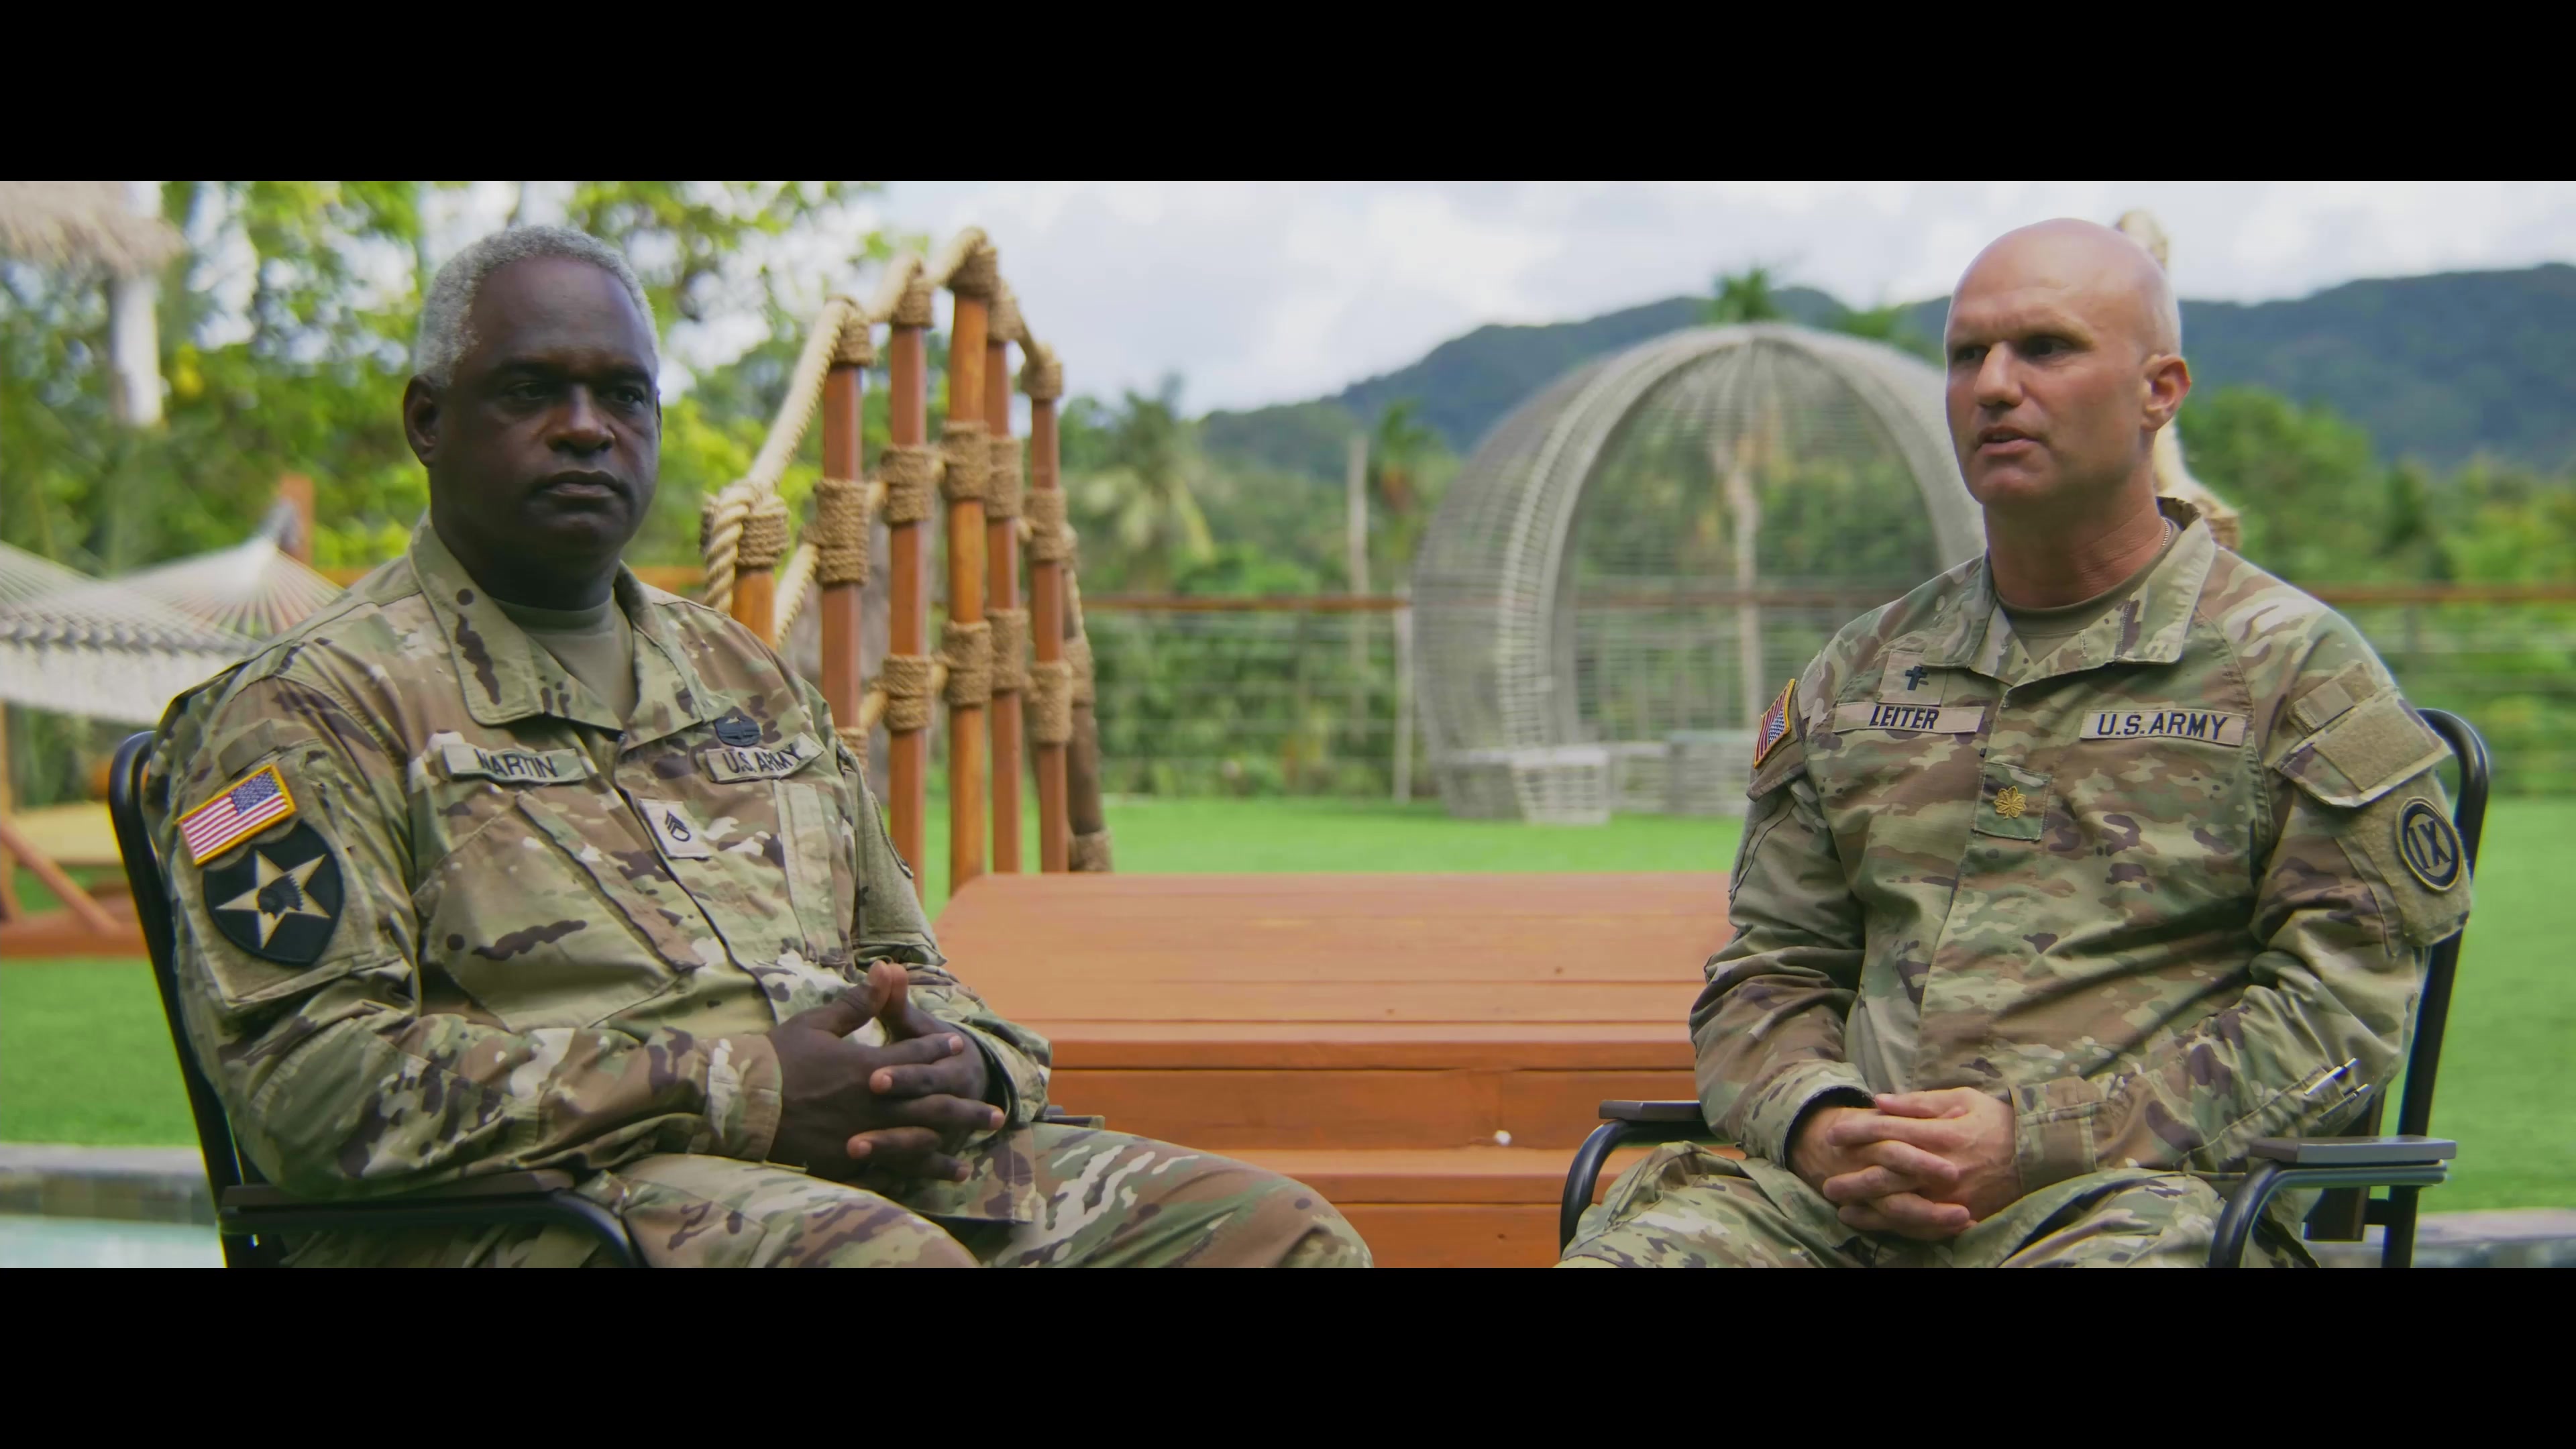 Today we take a look at the chaplain team in Operations in Pacific Island Countries. The chaplain team consists of Chaplain Daniel Leiter and Staff Sergeant Jonathan Martin. Take a look as they discuss their time spent in Palau.